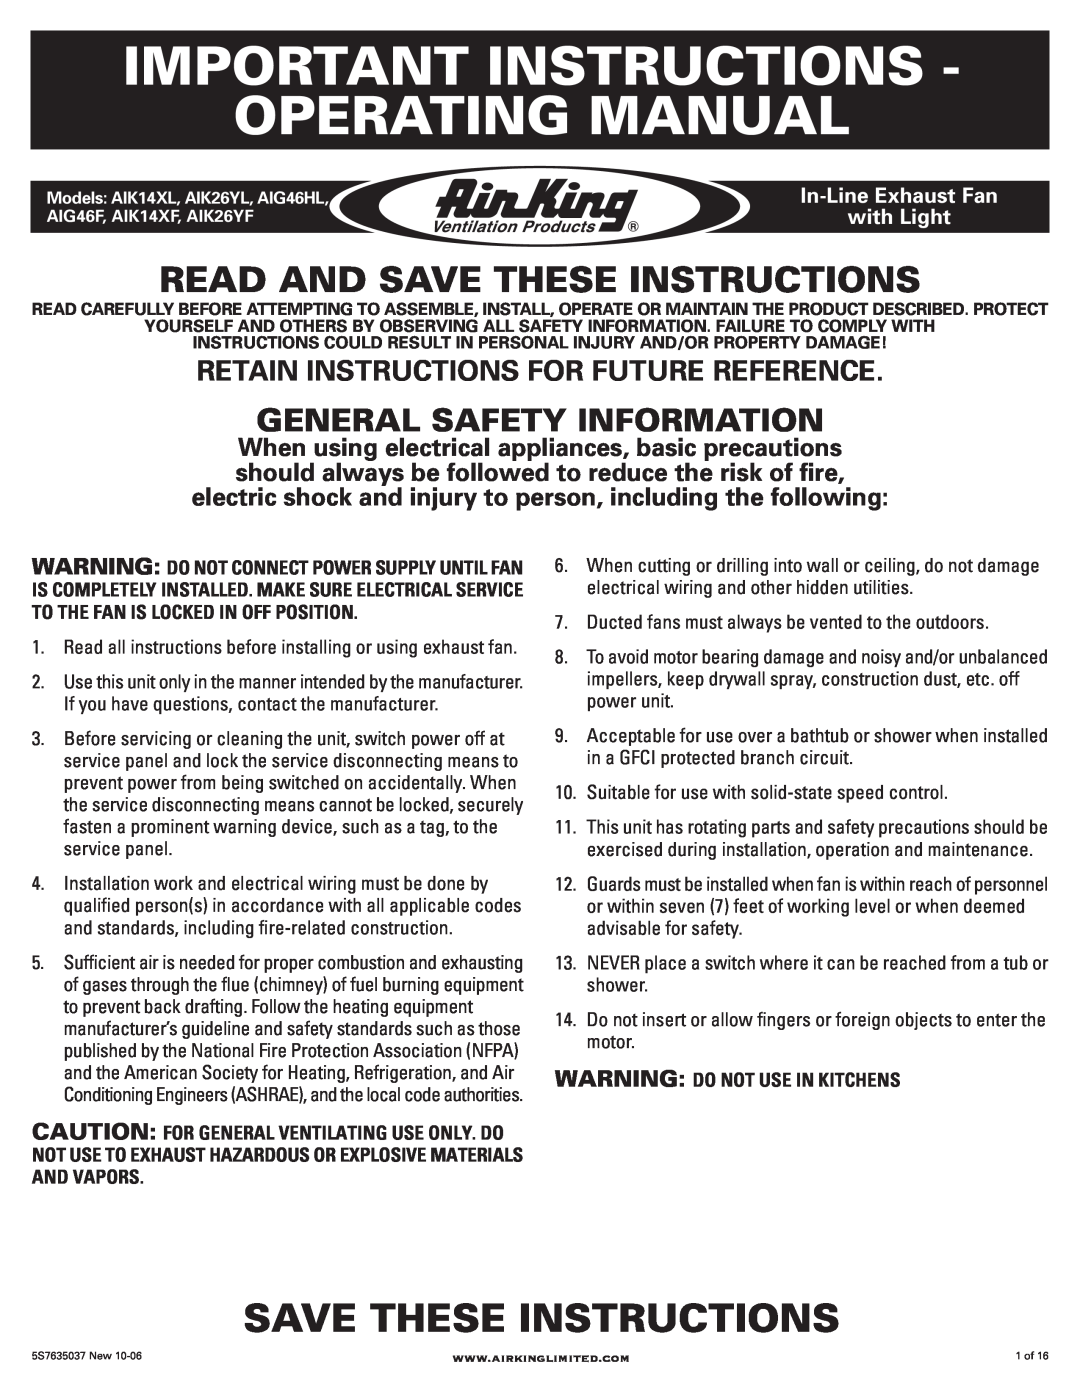 Air King AIK14XF, AIK14XL, AIK26YF manual Important Instructions Operating Manual, Read And Save These Instructions 